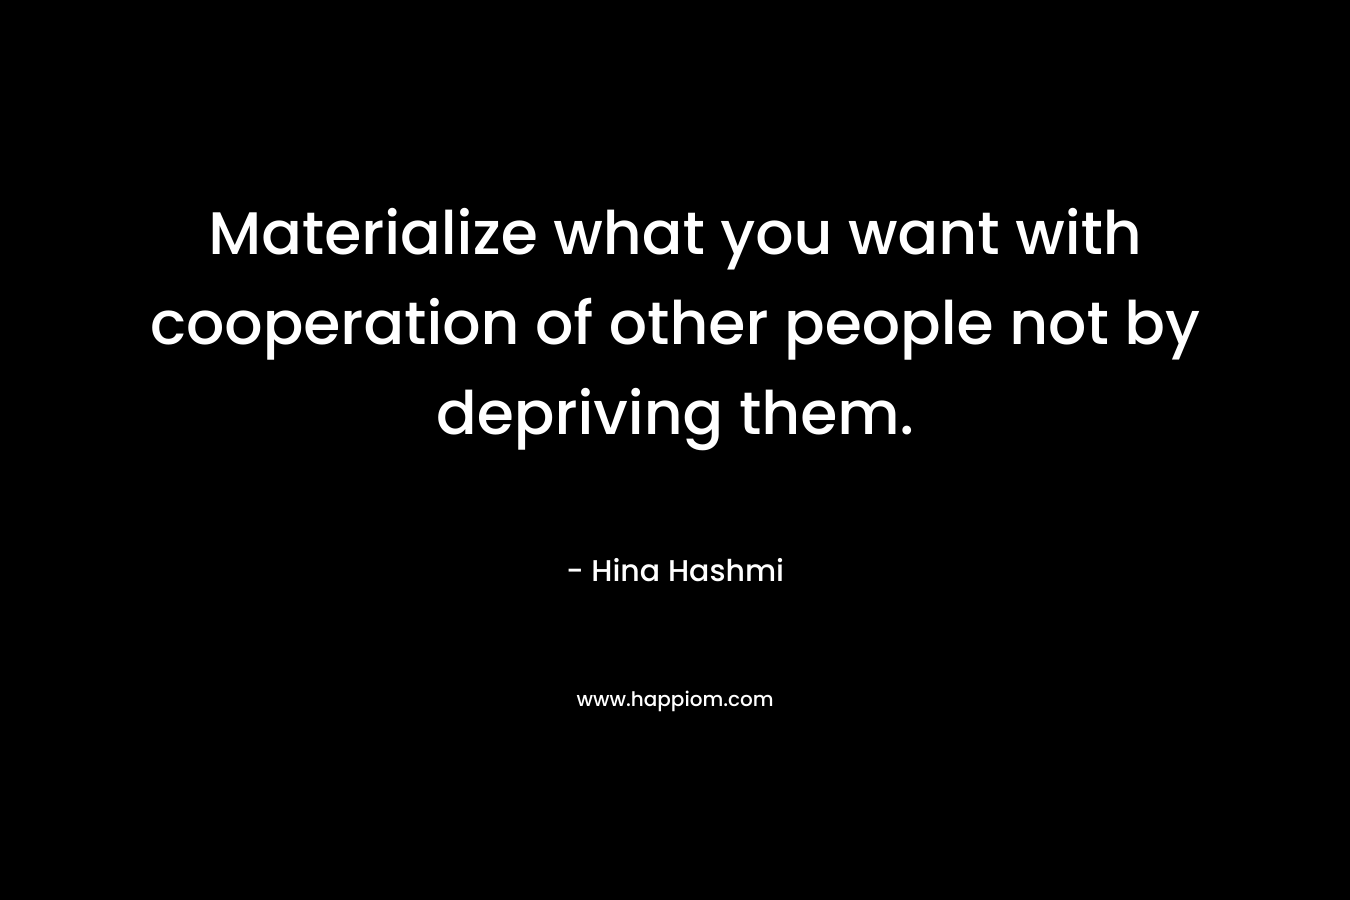 Materialize what you want with cooperation of other people not by depriving them. – Hina Hashmi